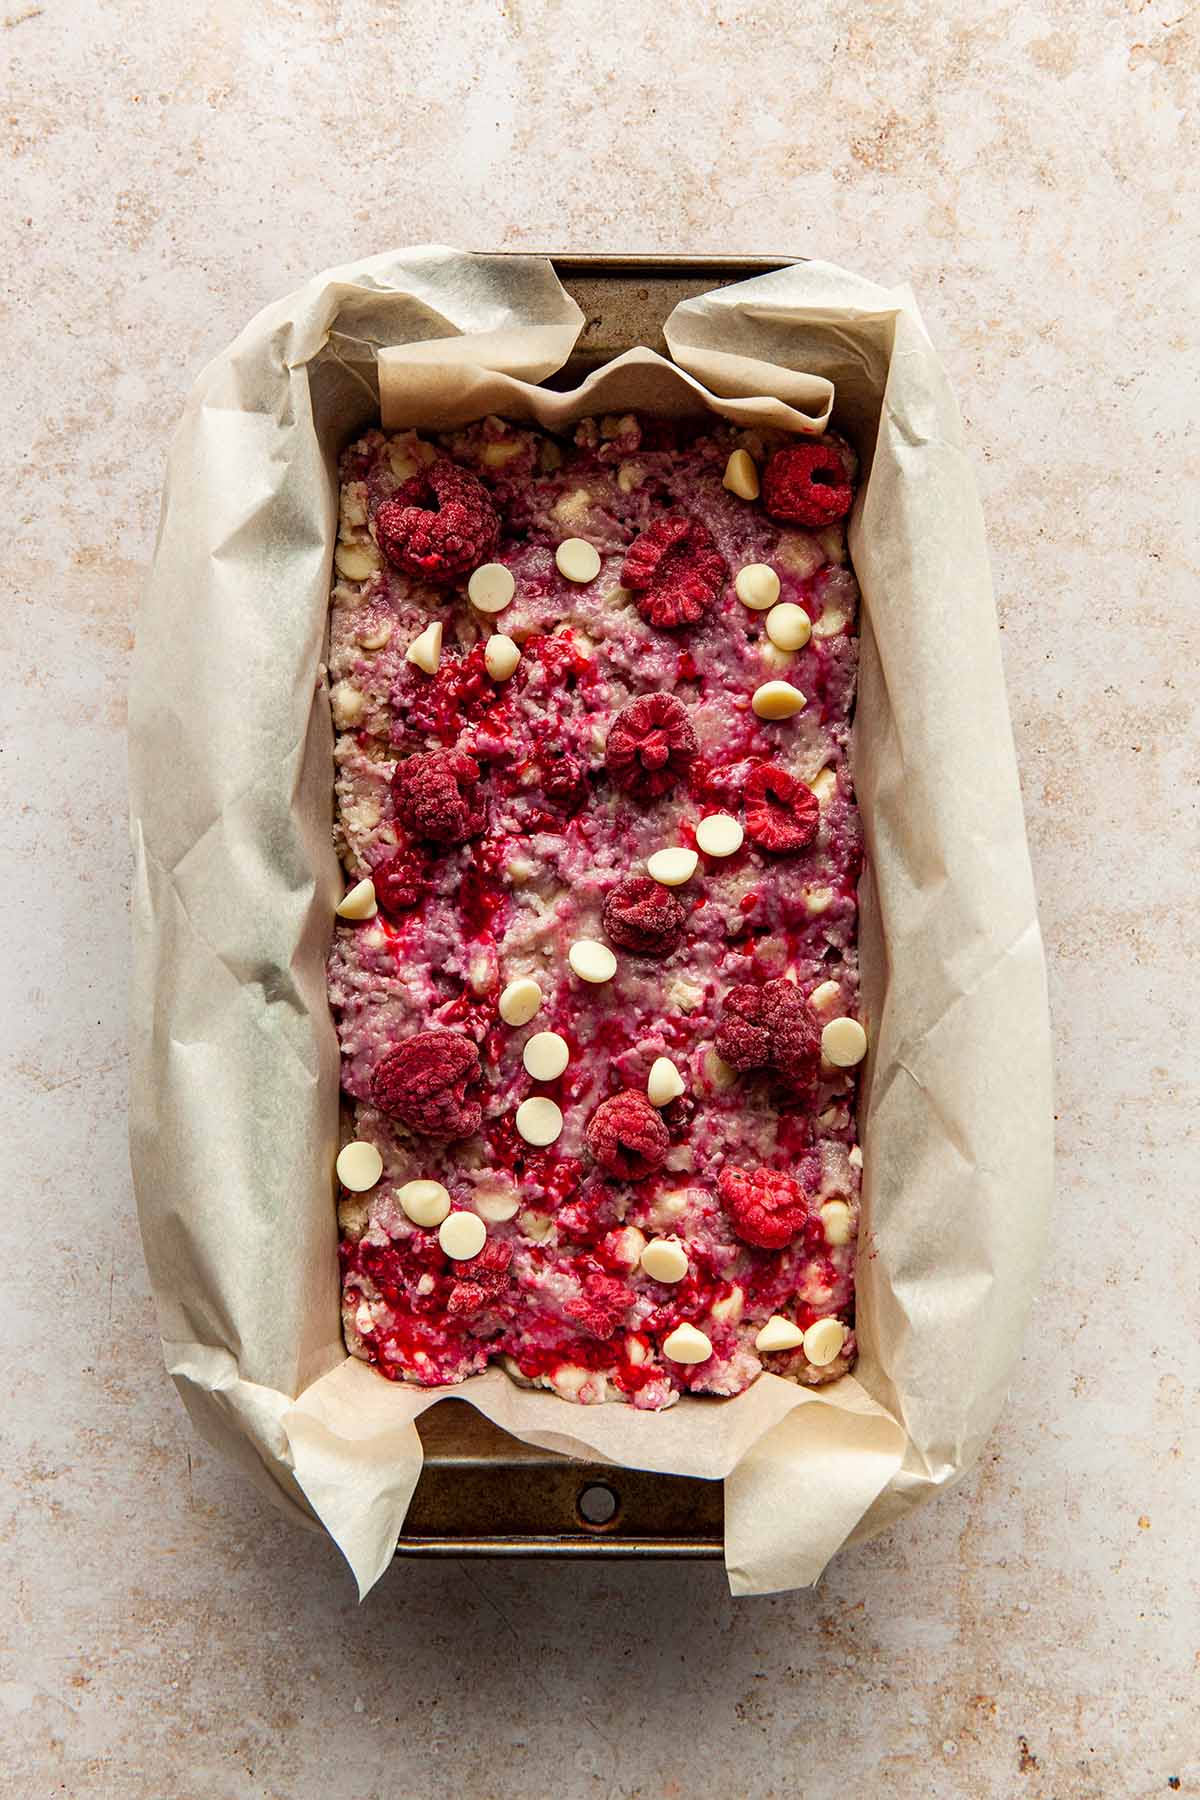 Unbaked batter in a loaf tin lined with parchment paper, topped with extra raspberries and white chocolate chips.